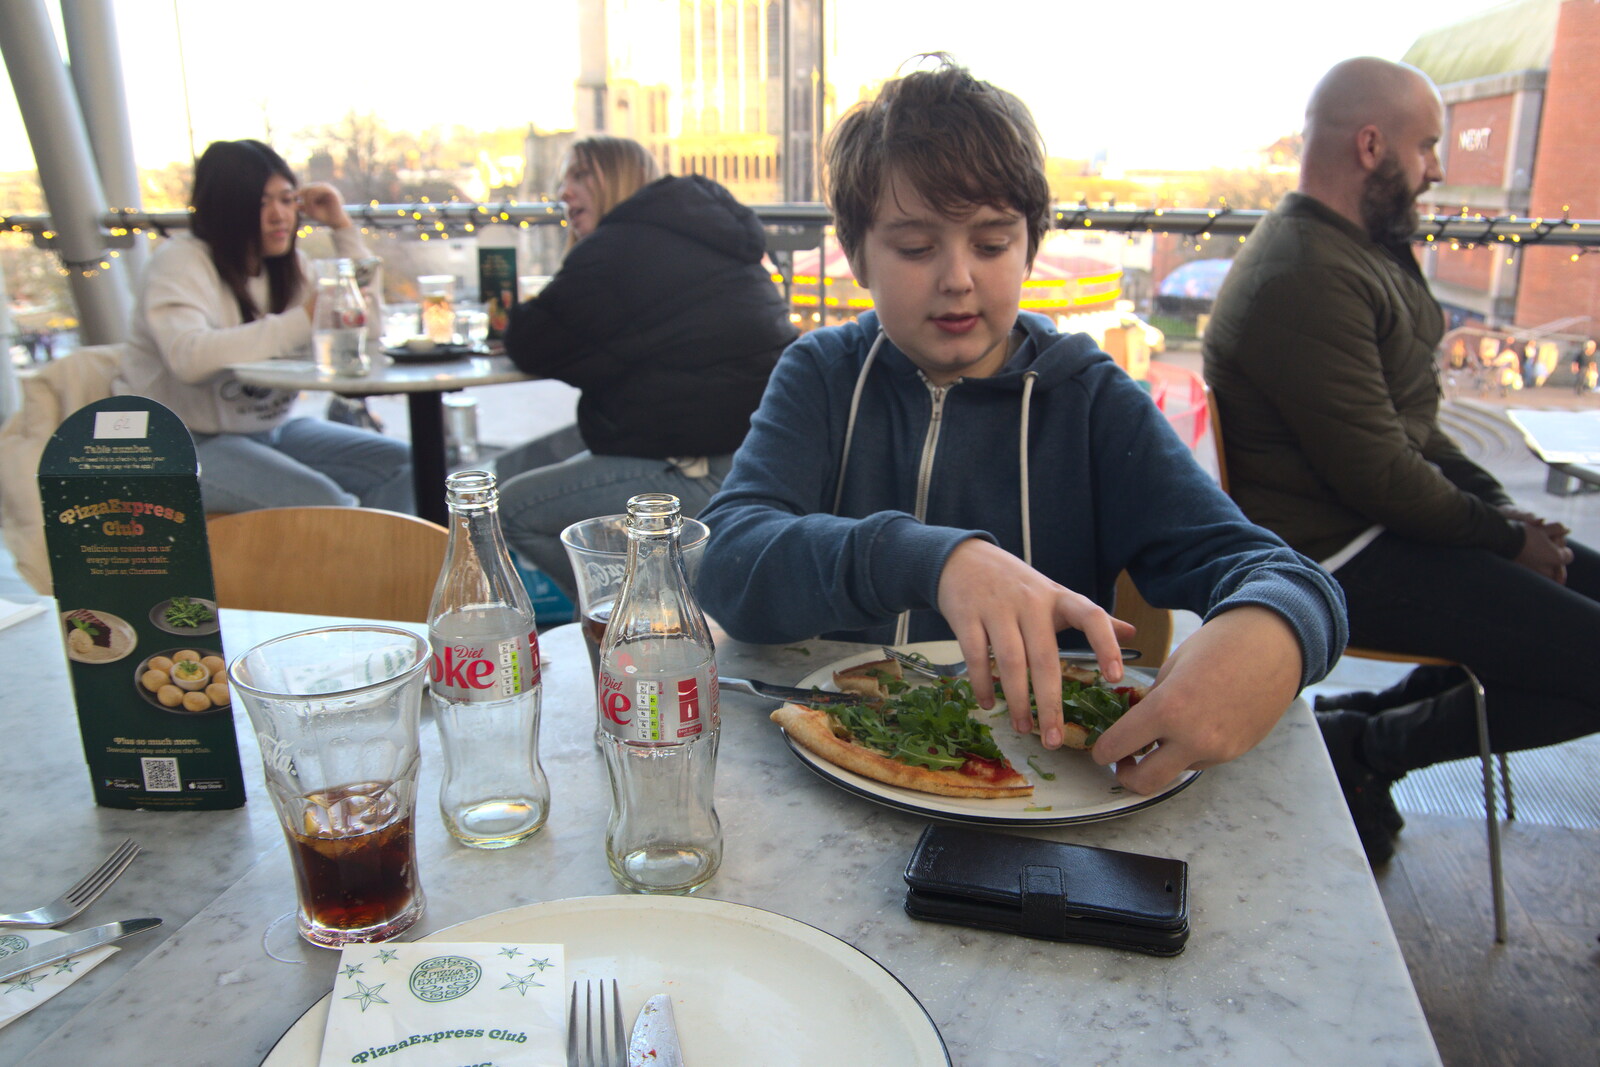 Fred wrangles the rocket on his pizza from Christmas Shopping in Norwich, Norfolk - 21st December 2022